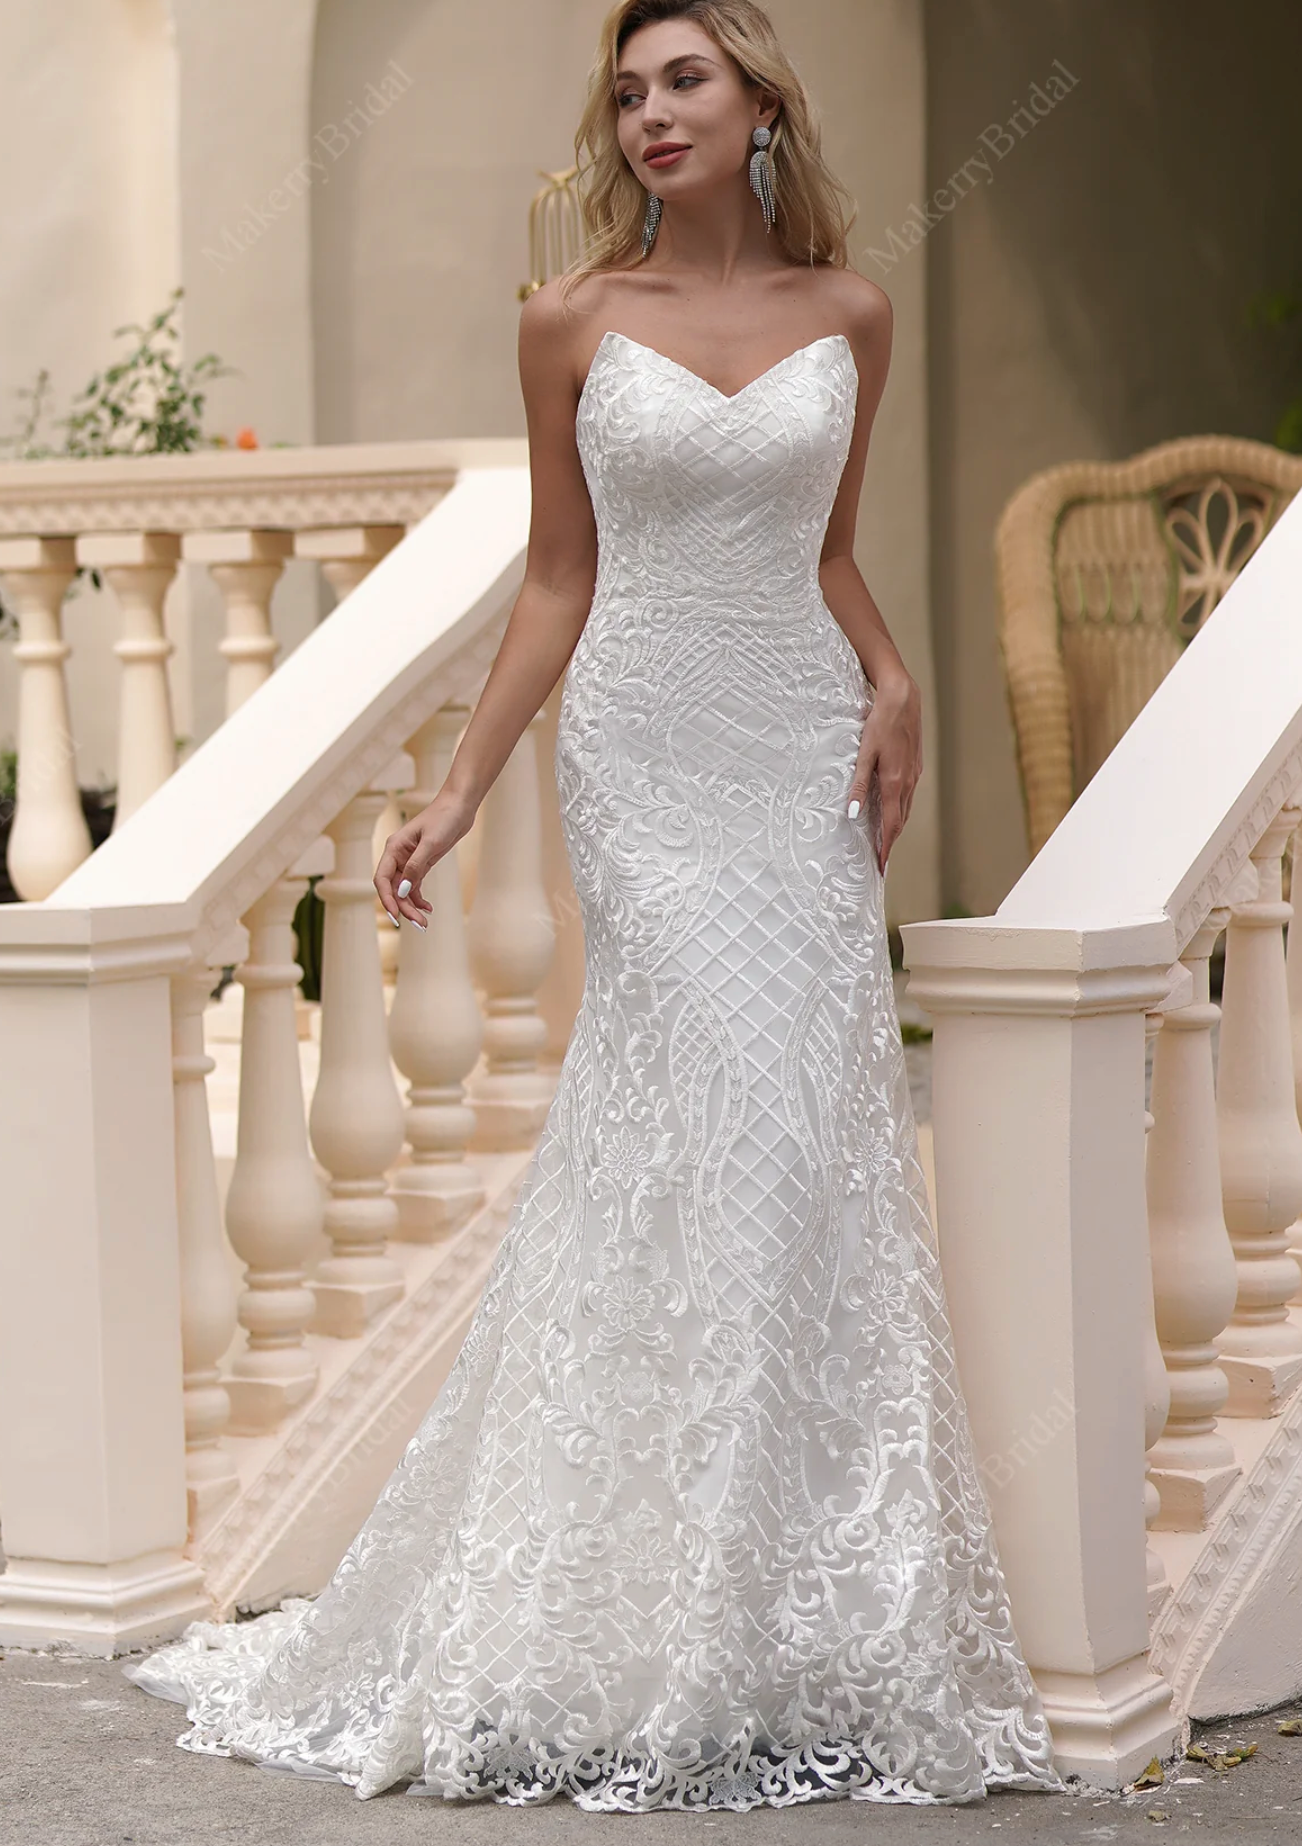 Spaghetti Strap Sweetheart Neckline Fit And Flare Wedding Dress – TulleLux  Bridal Crowns & Accessories